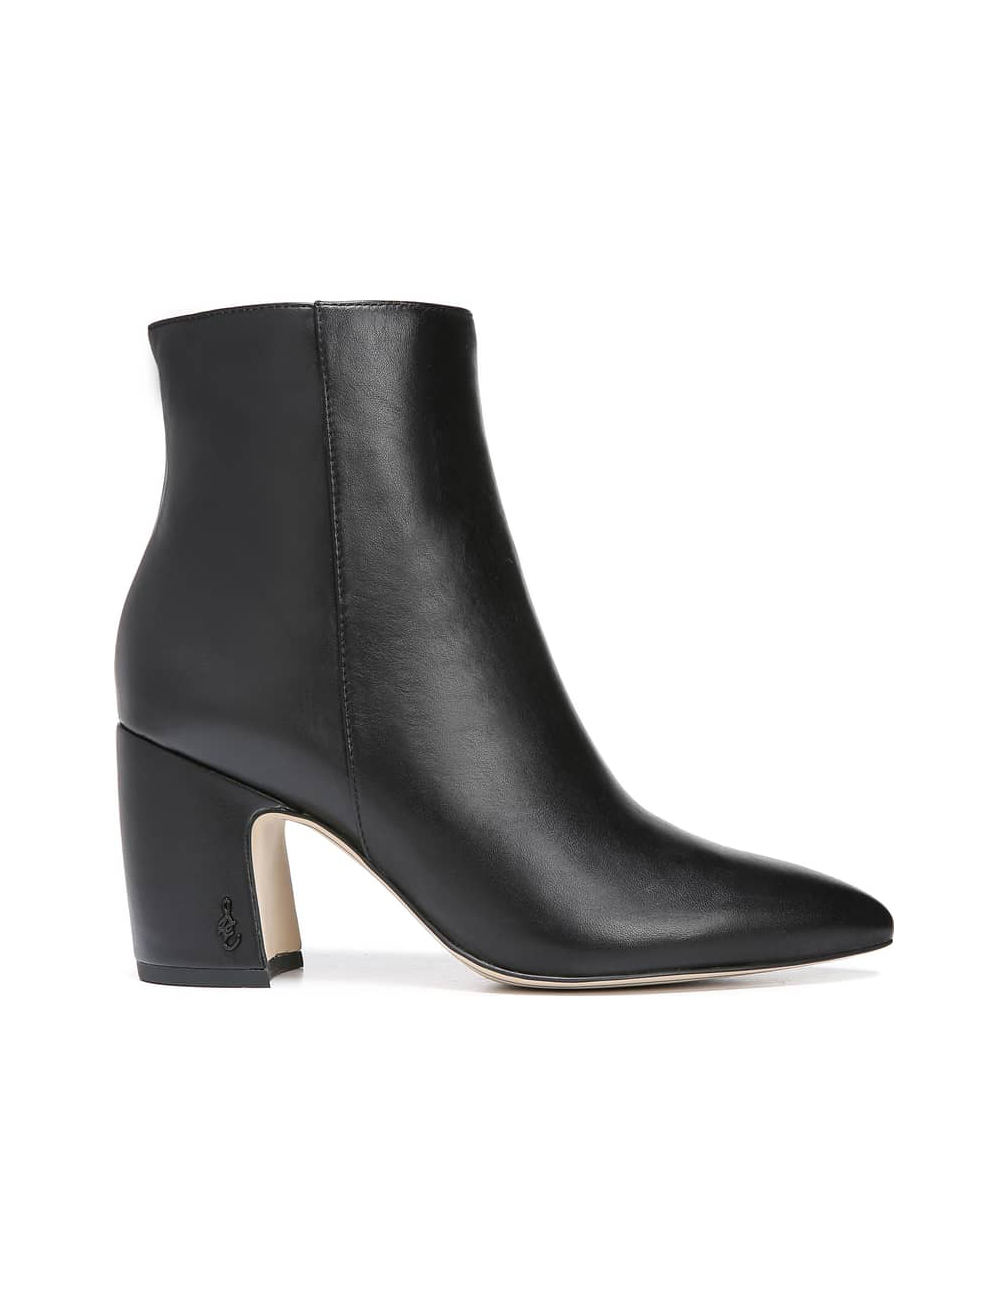 most comfortable ankle boots for walking